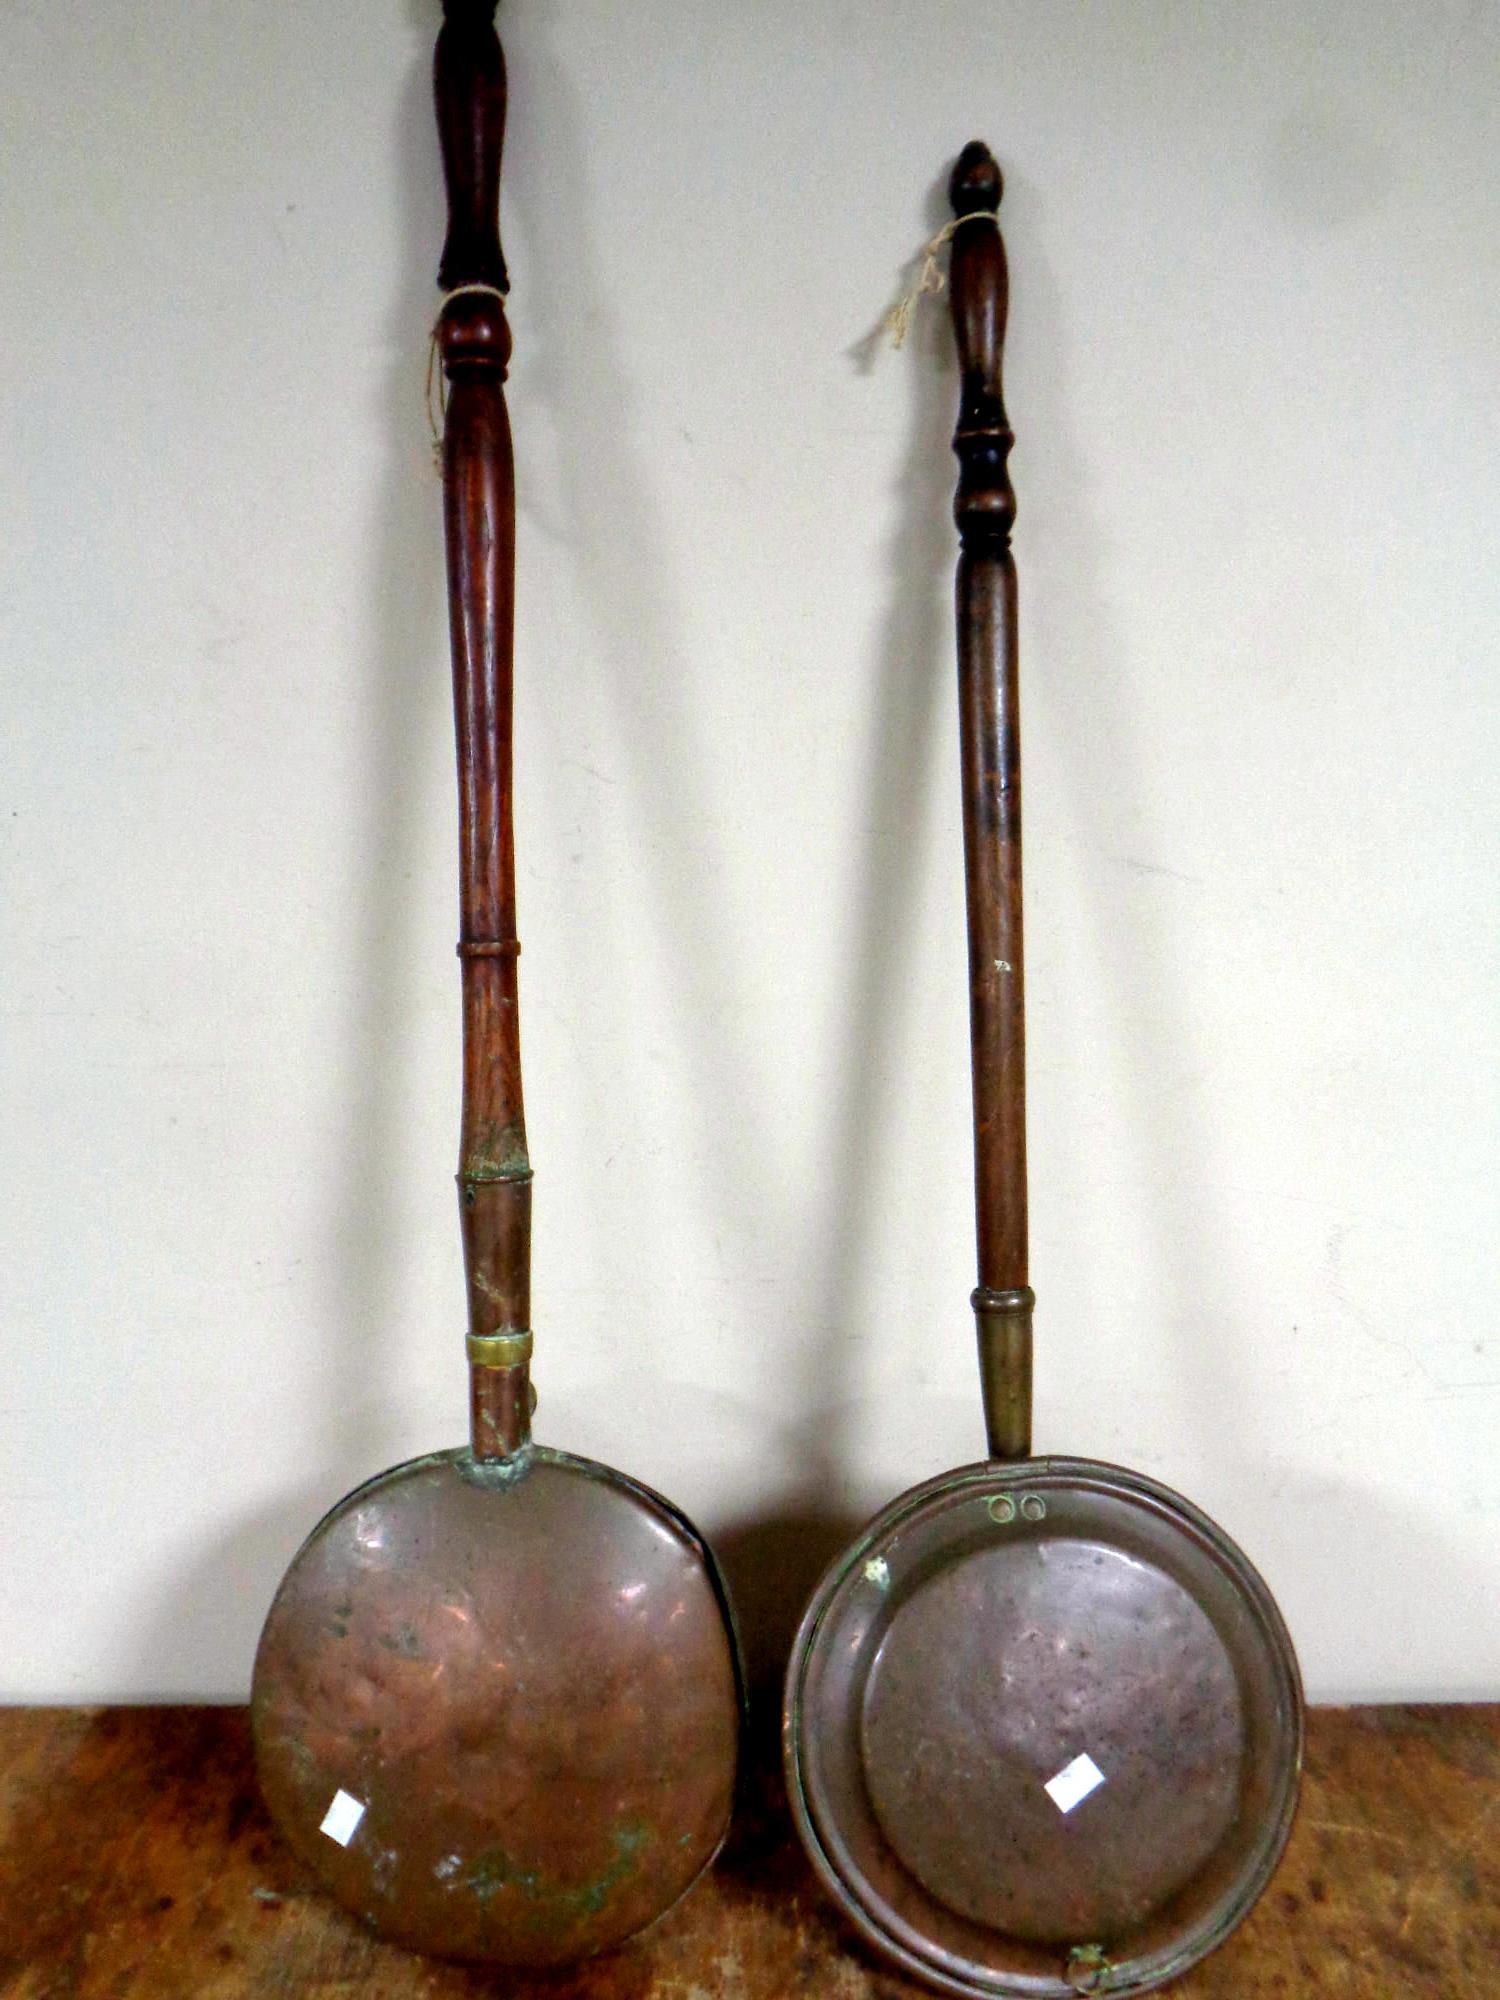 Two 19th century brass bed warming pans